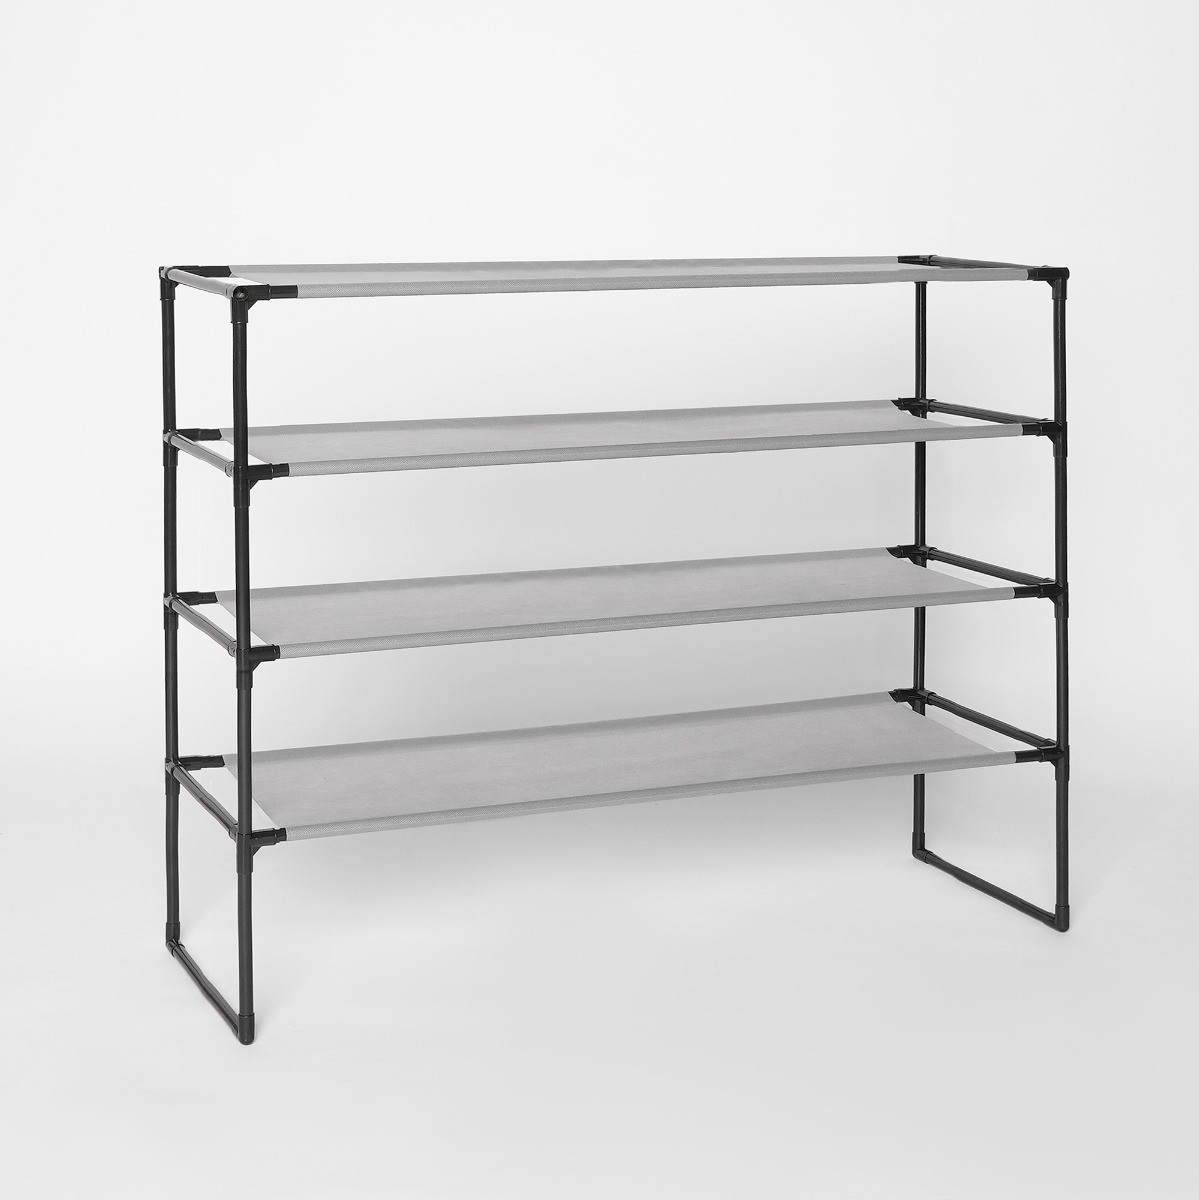 OHS Storage Rack, Charcoal - 4 Tier